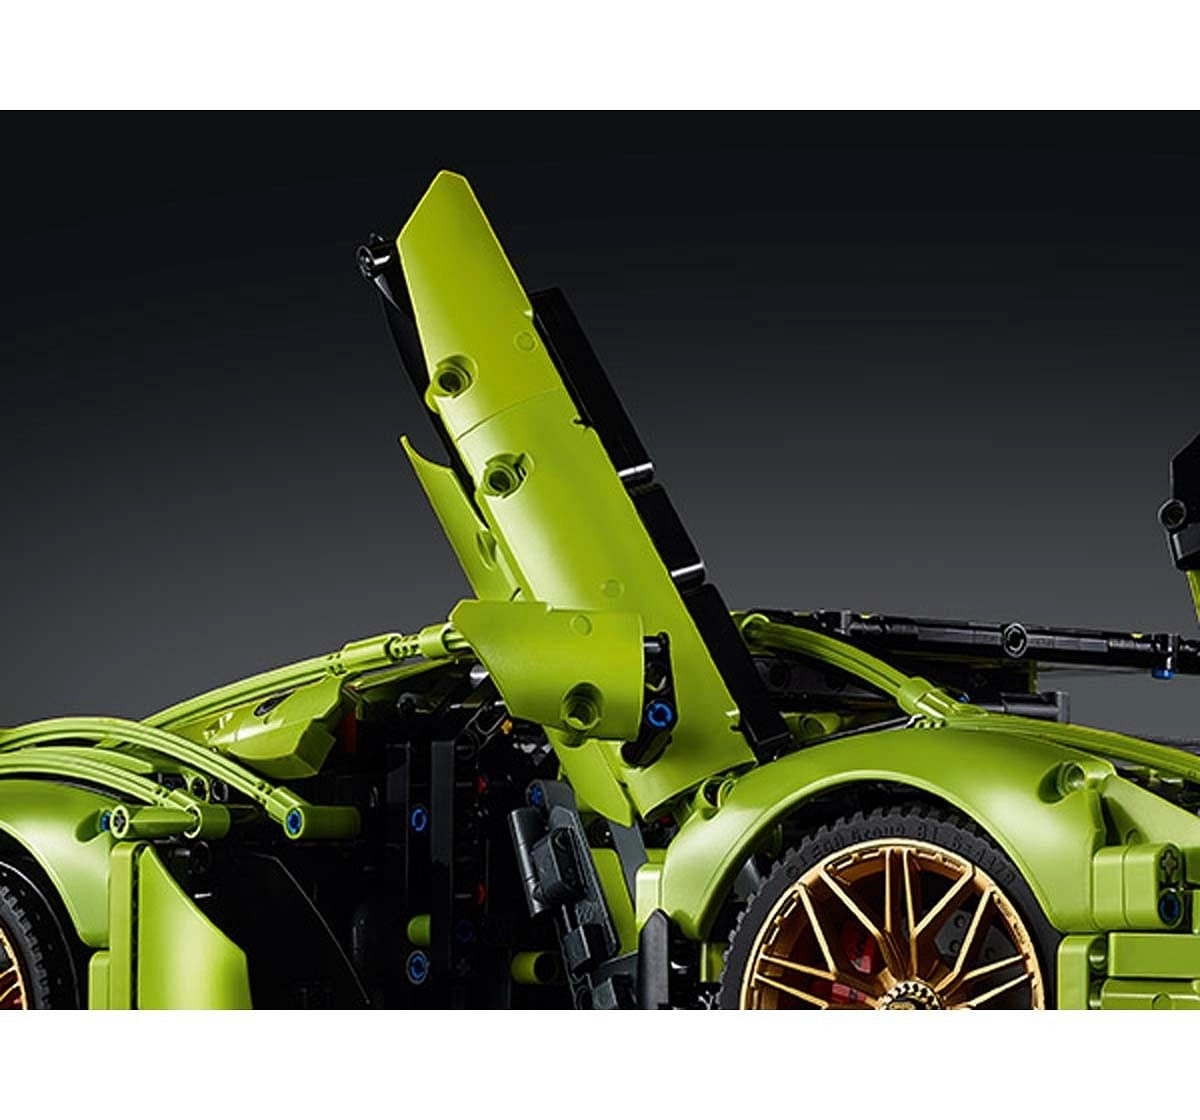 LEGO's Lamborghini Sián is one the coolest sets ever and you can buy it now